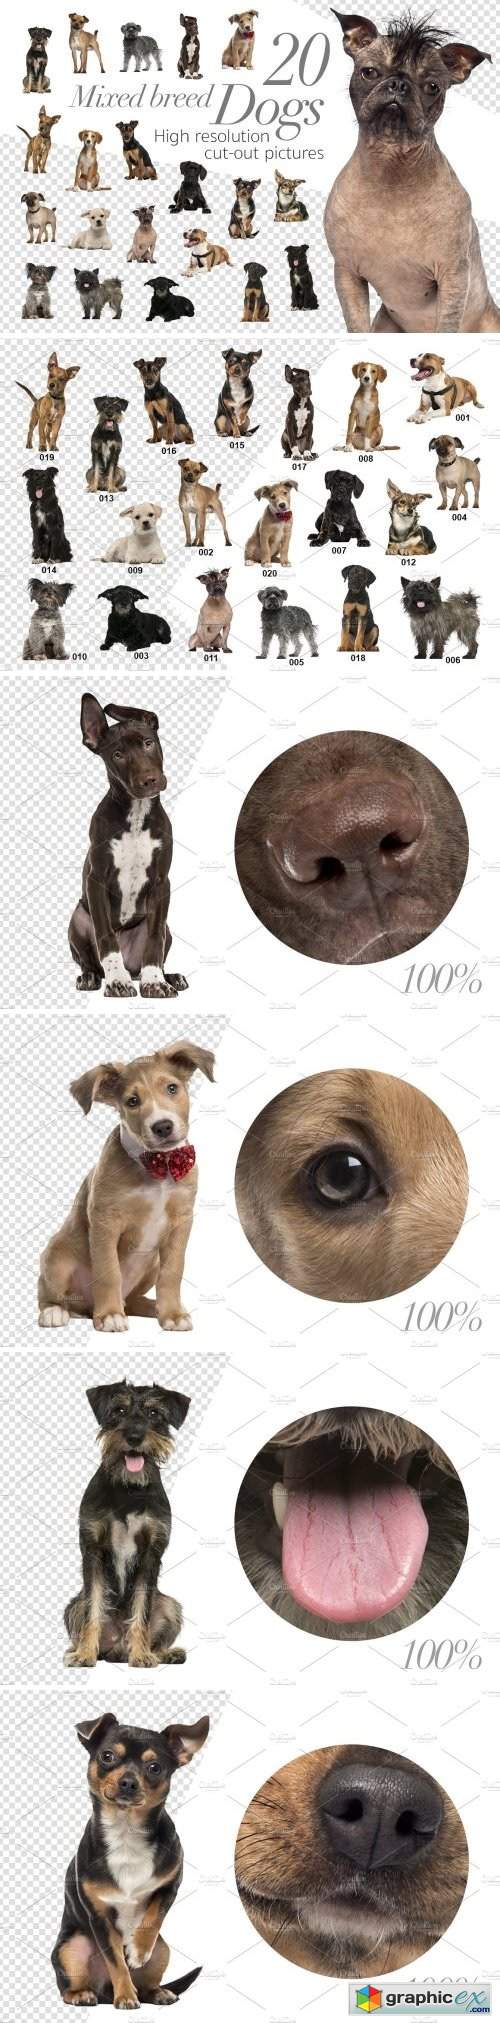 20 Mixed breed Dogs - Cut-out Pics